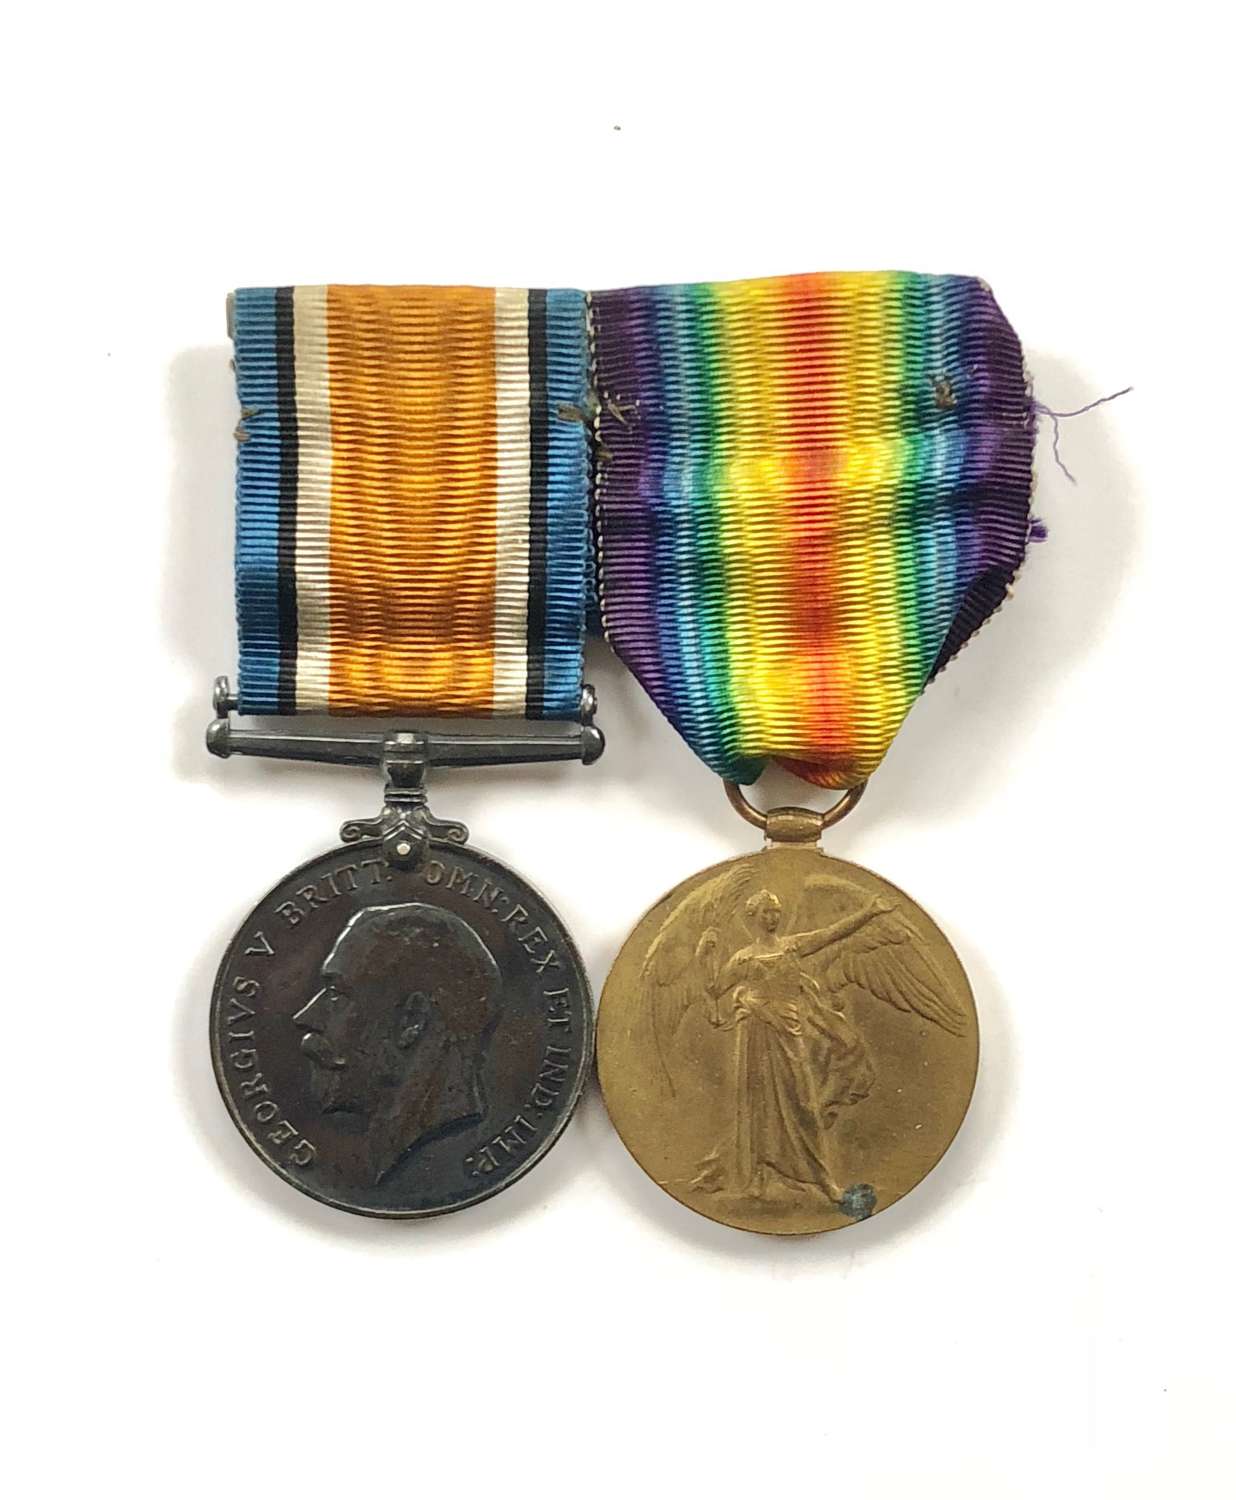 WW1 Royal Fusiliers London Regiment Pair of Medals.